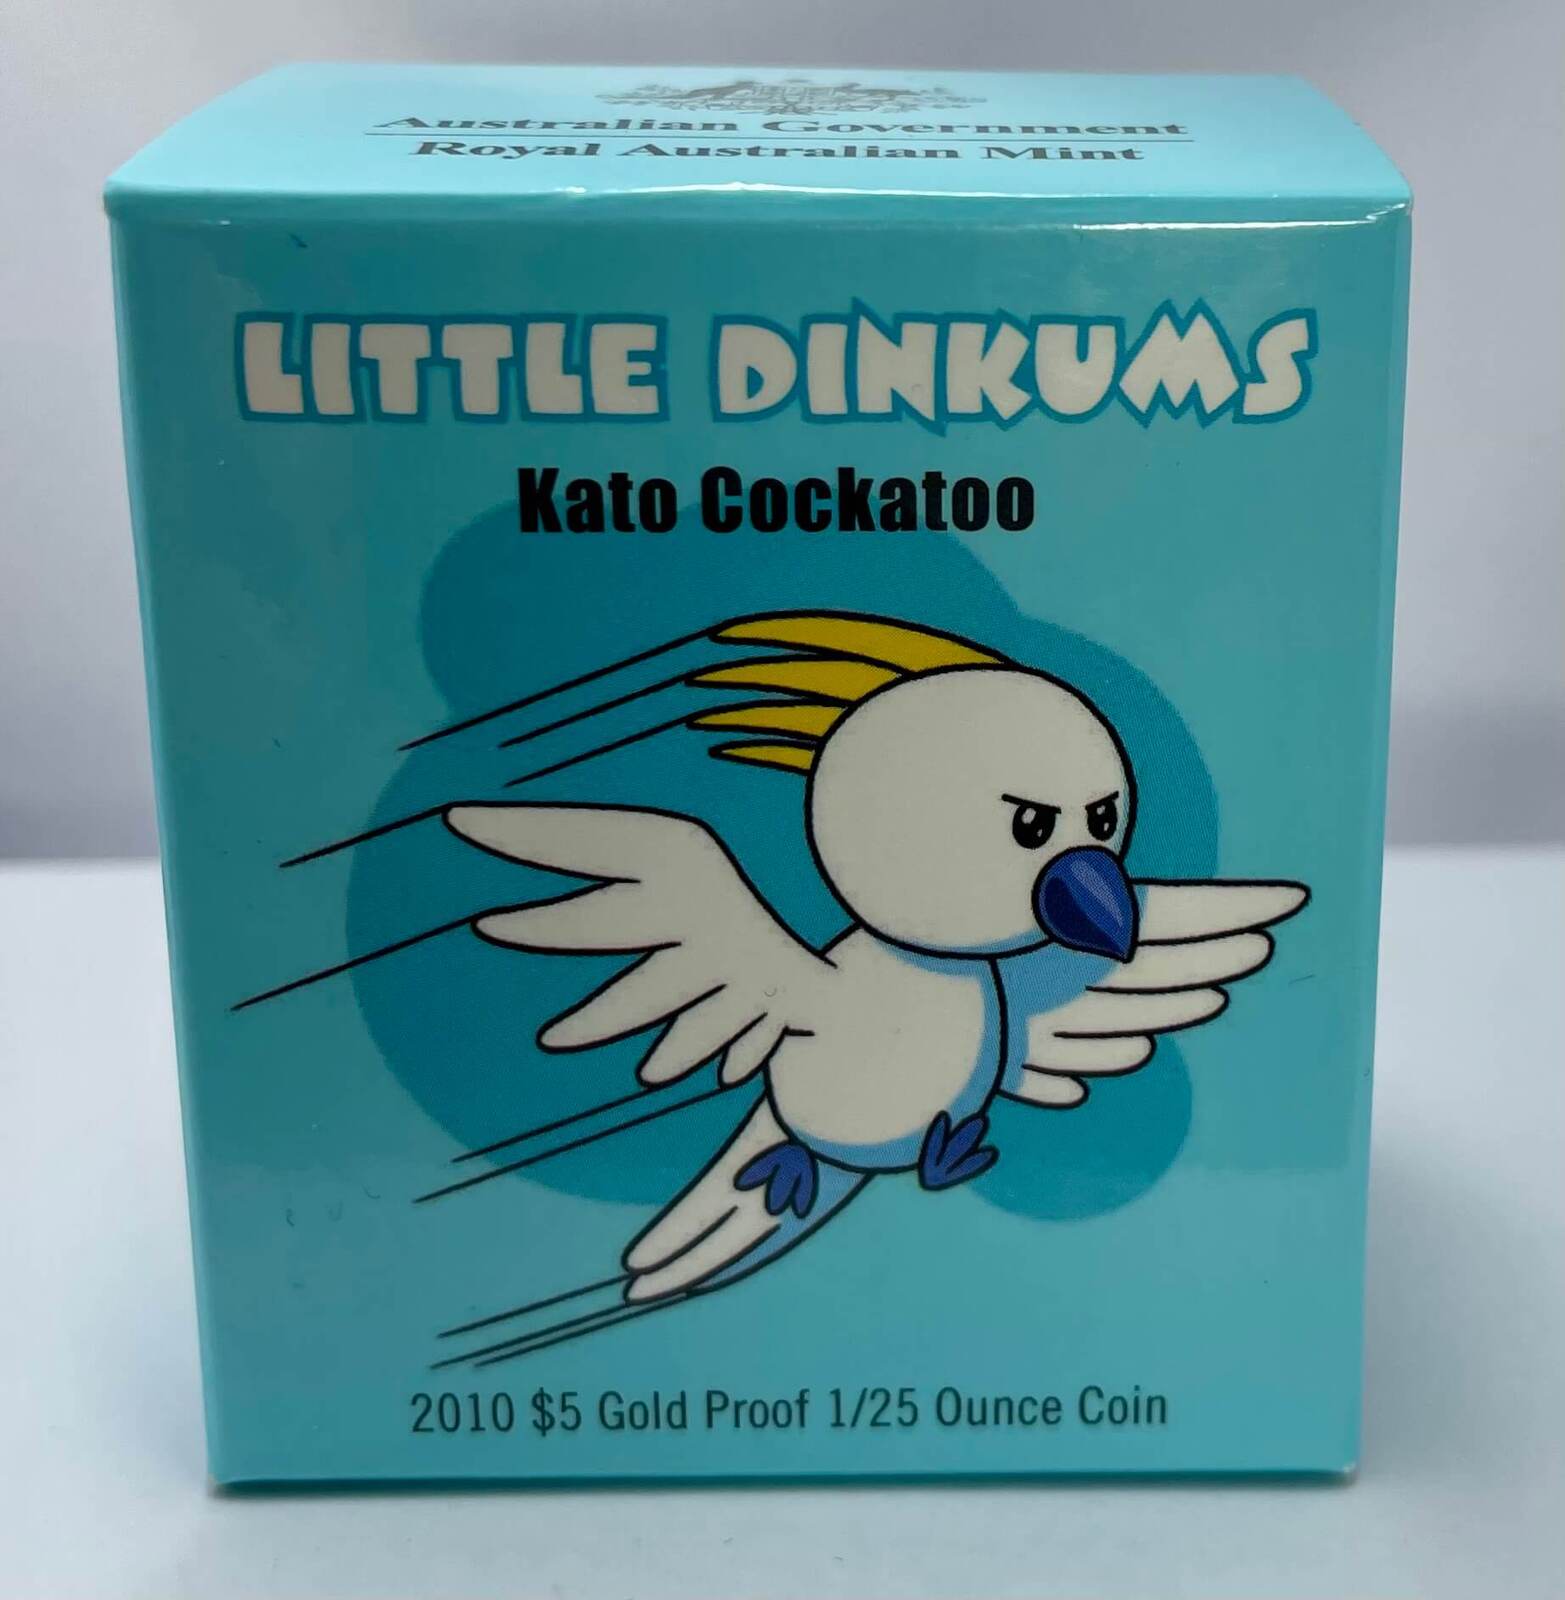 2010 Gold $5 Proof Little Dinkums - Kato Cockatoo product image